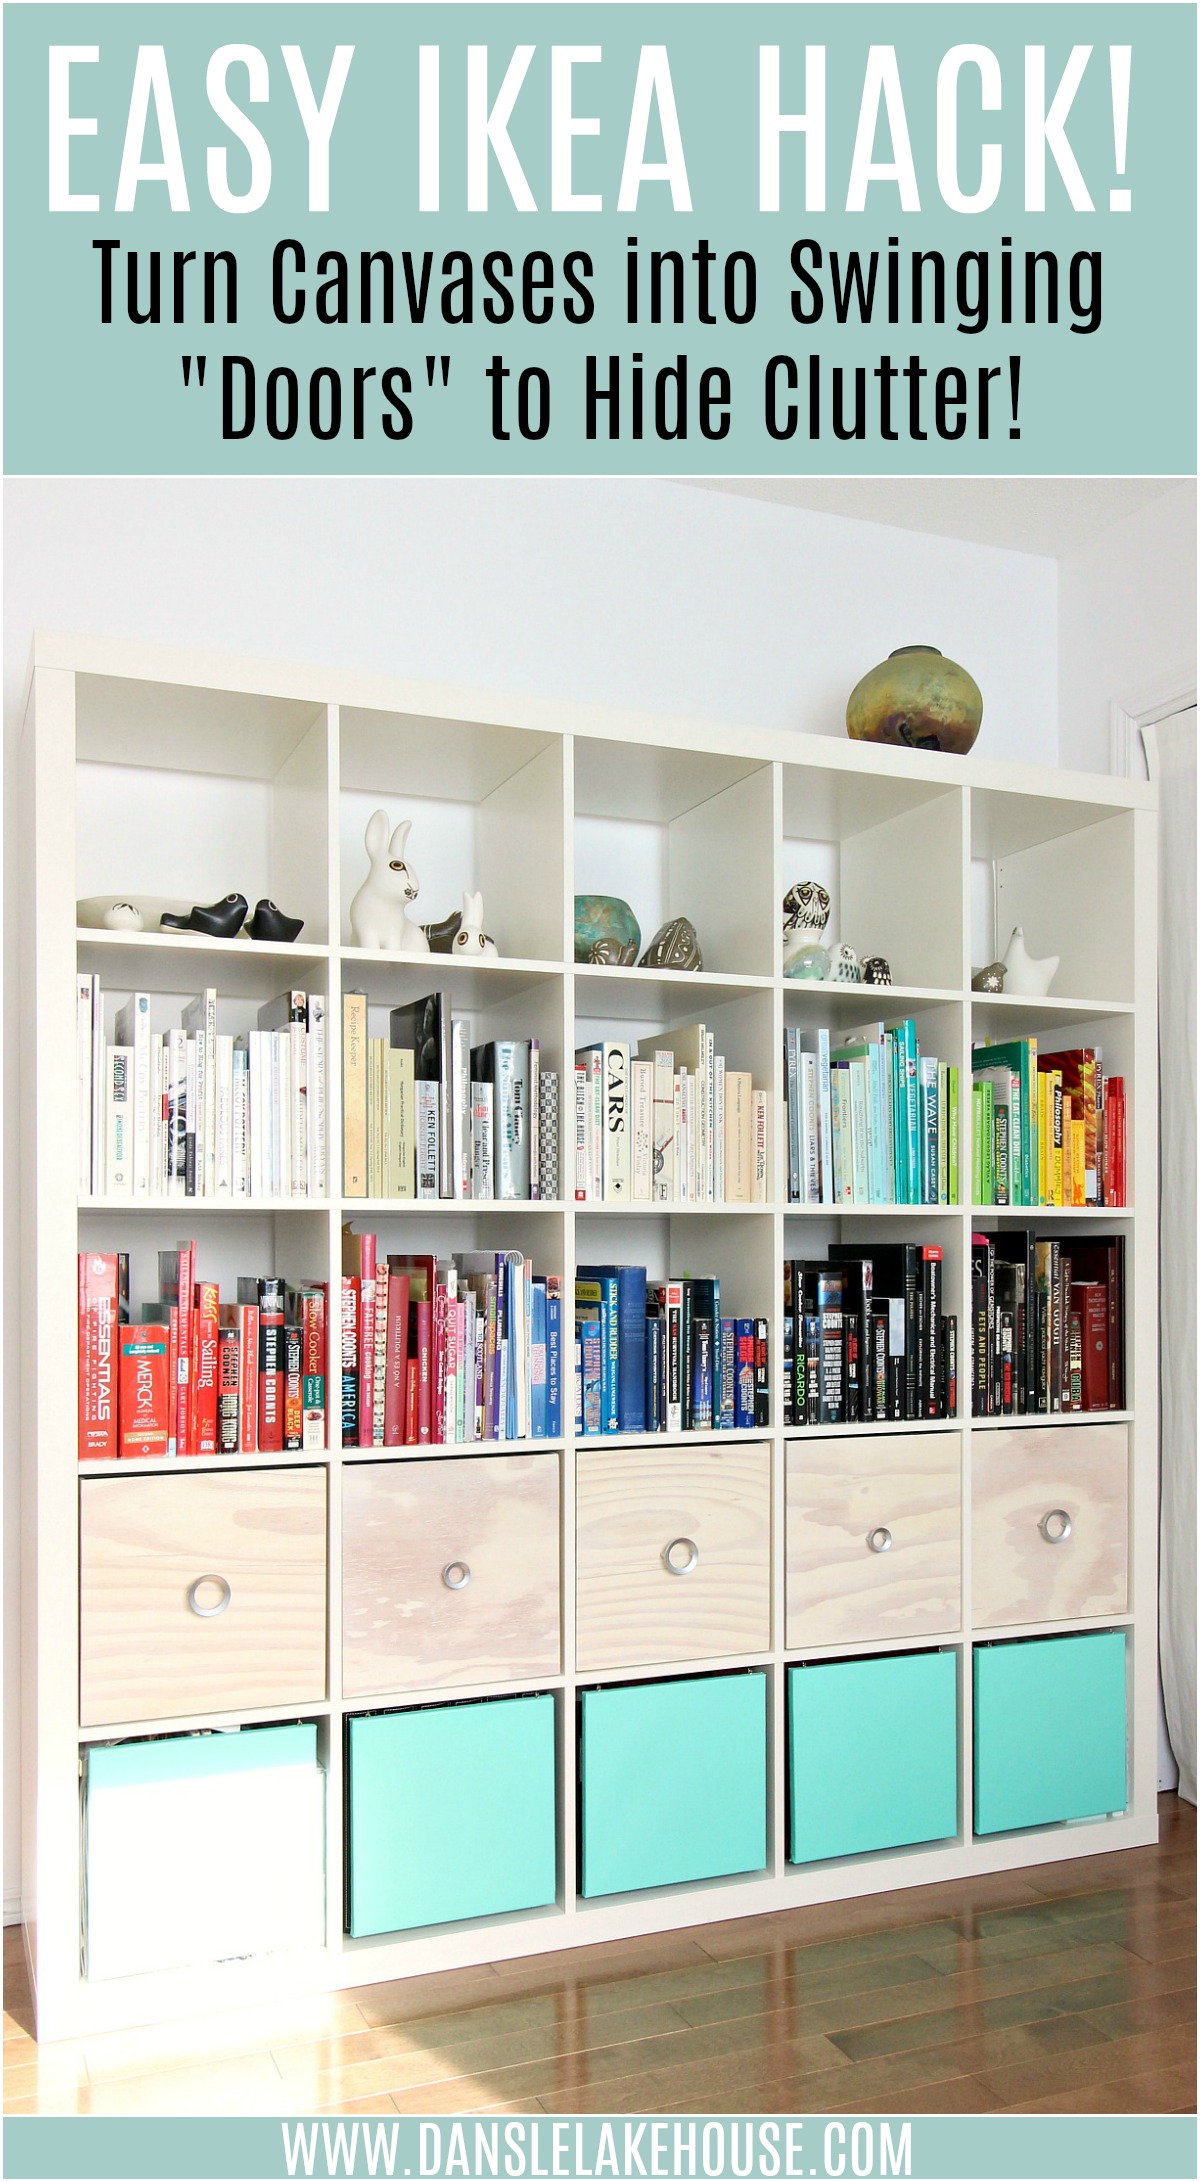 Hide Clutter with this Easy IKEA Hack for Expedit Bookcases - Version 2.0 #ikeahack #ikea #expedit #diyhomedecor